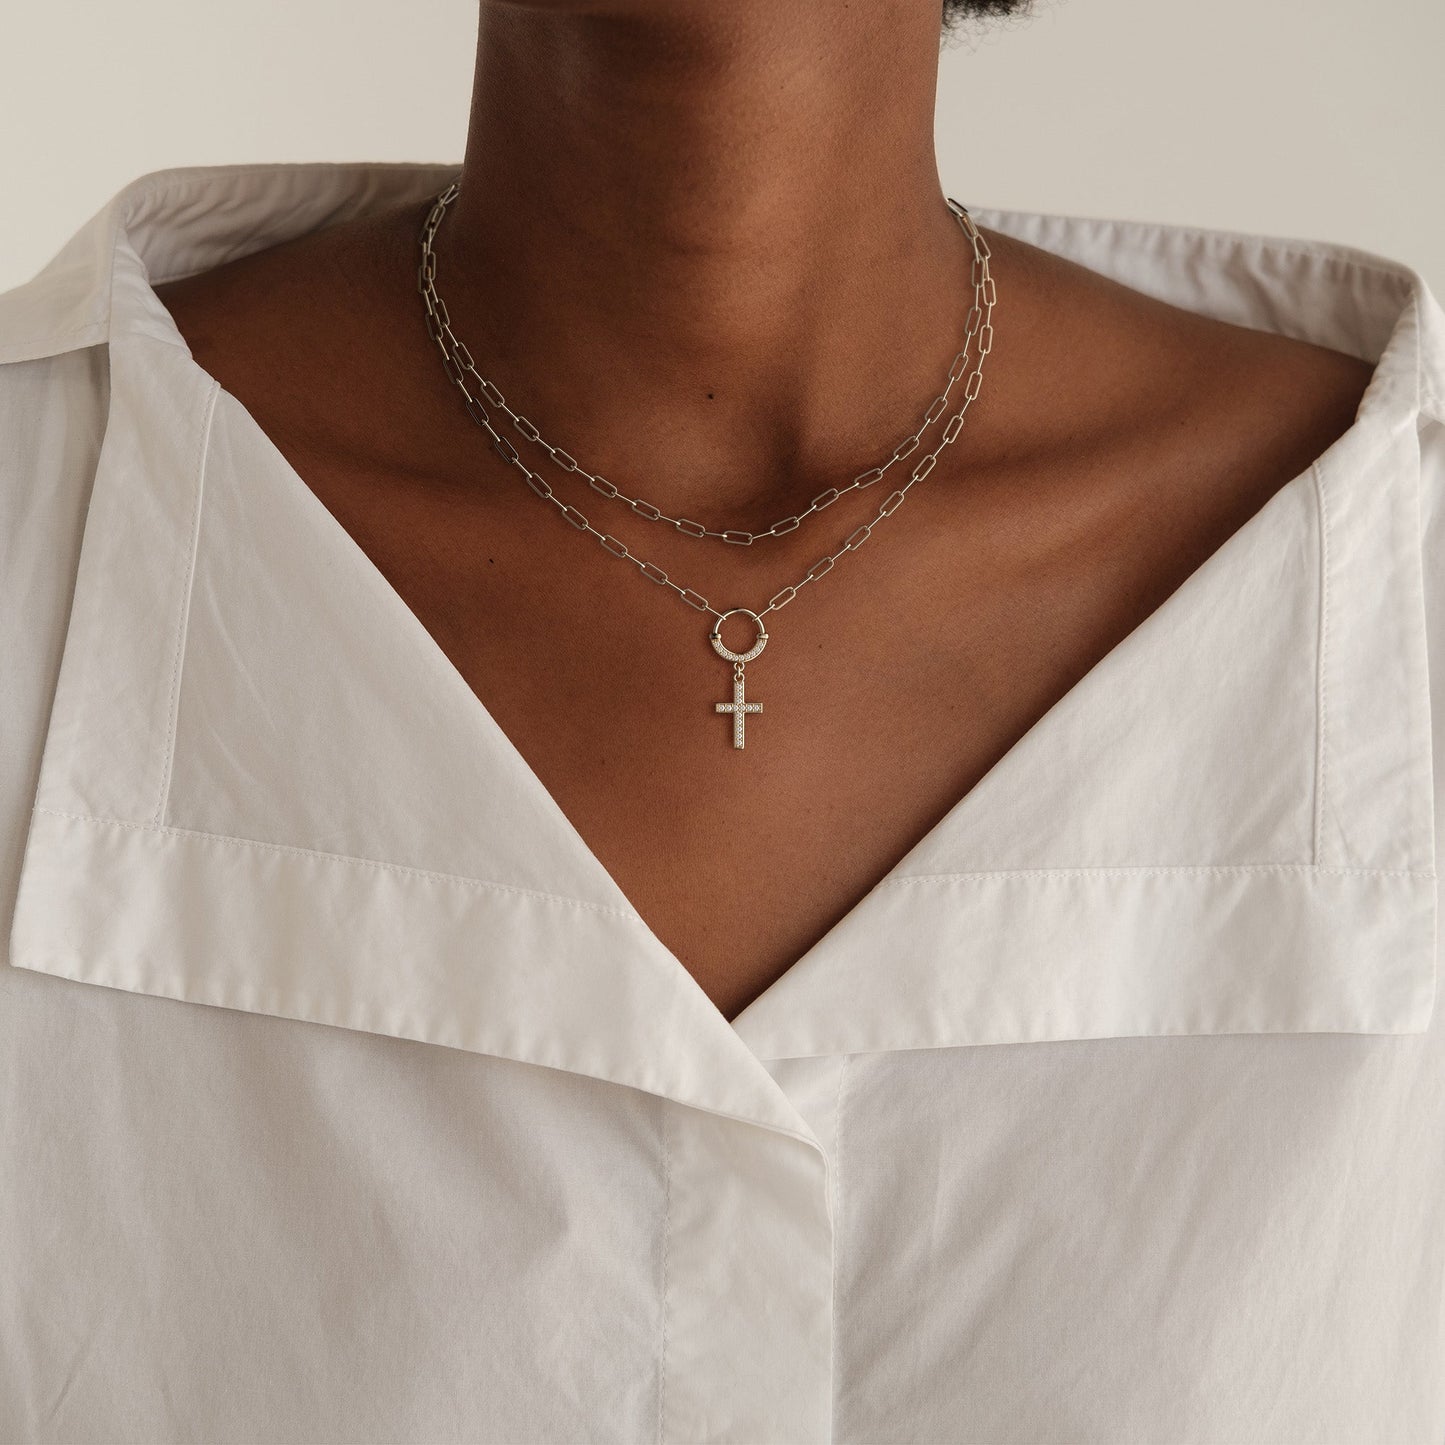 Friendship Circle Cross Necklace